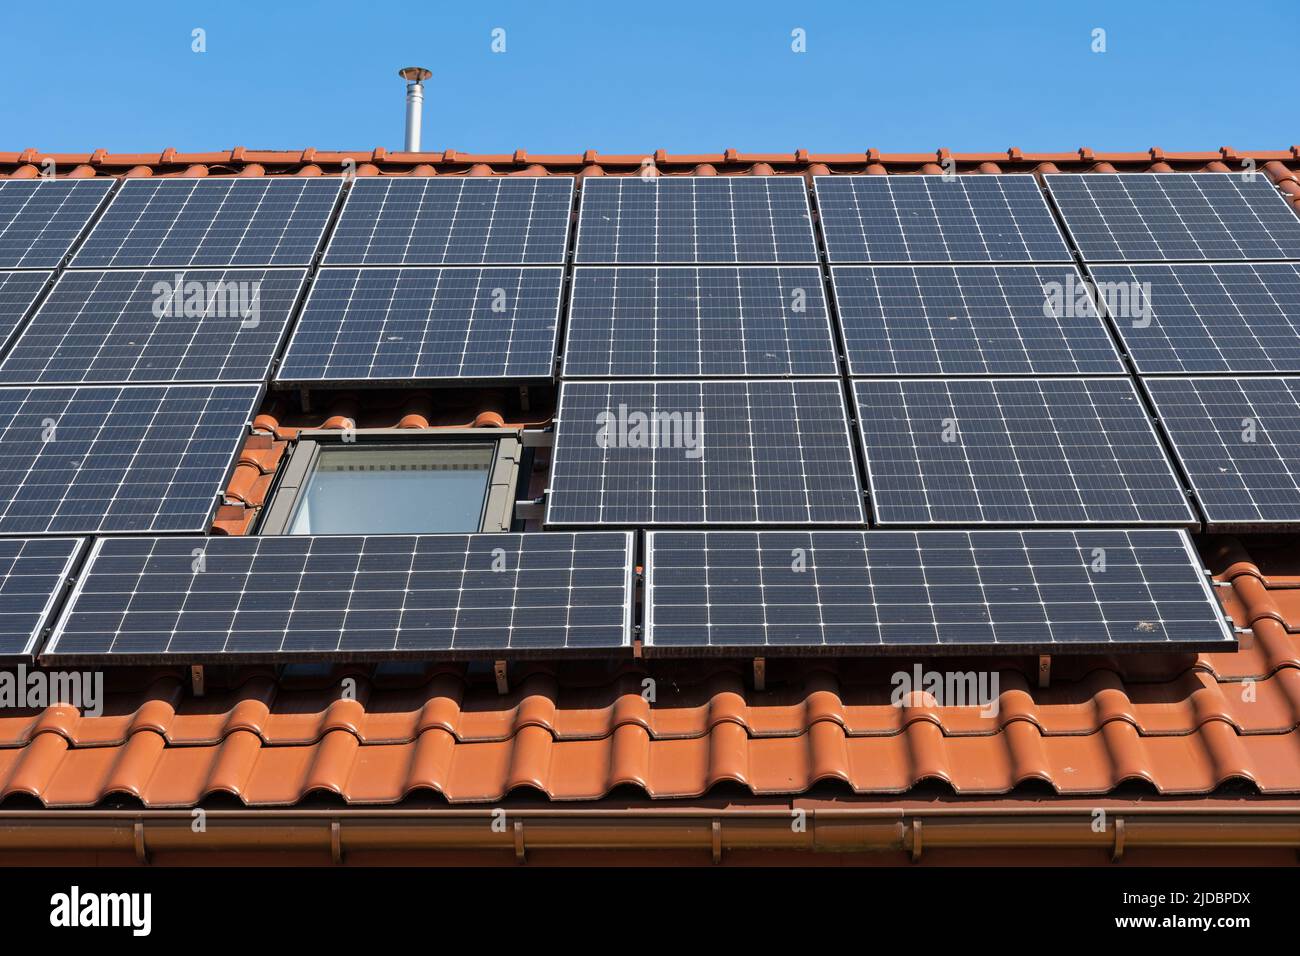 Solar panels installed on house roof, photovoltaic system converting energy from sunlight into clean, emission-free electricity to power a home all ye Stock Photo